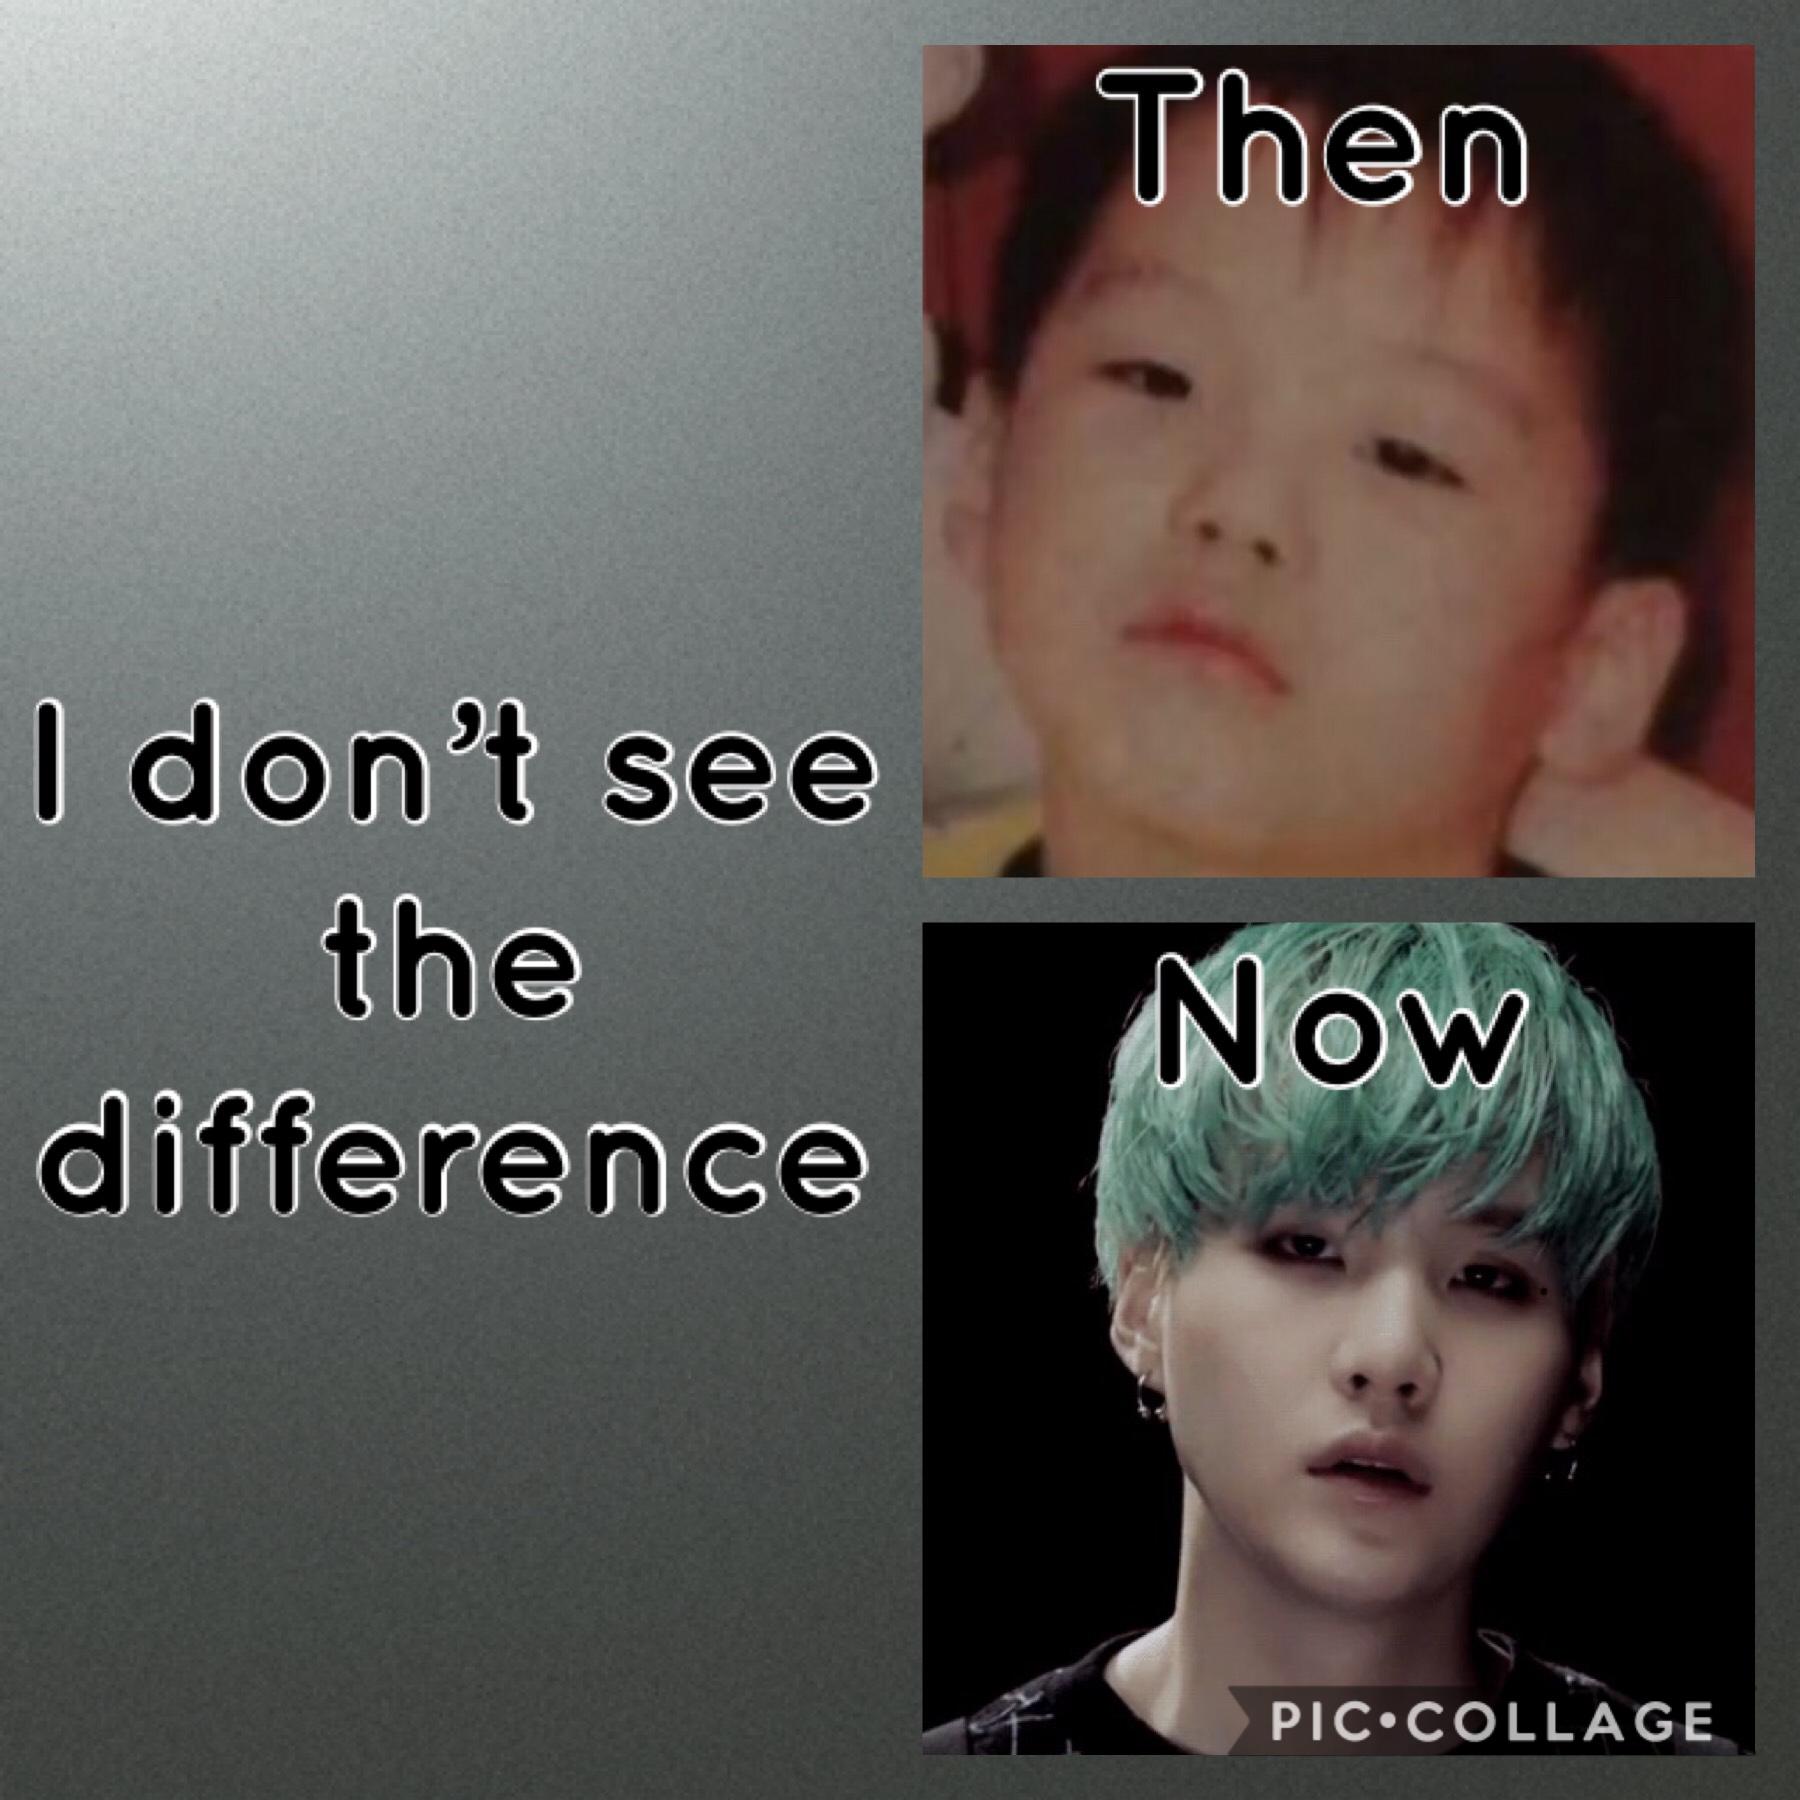 Do you see the difference 